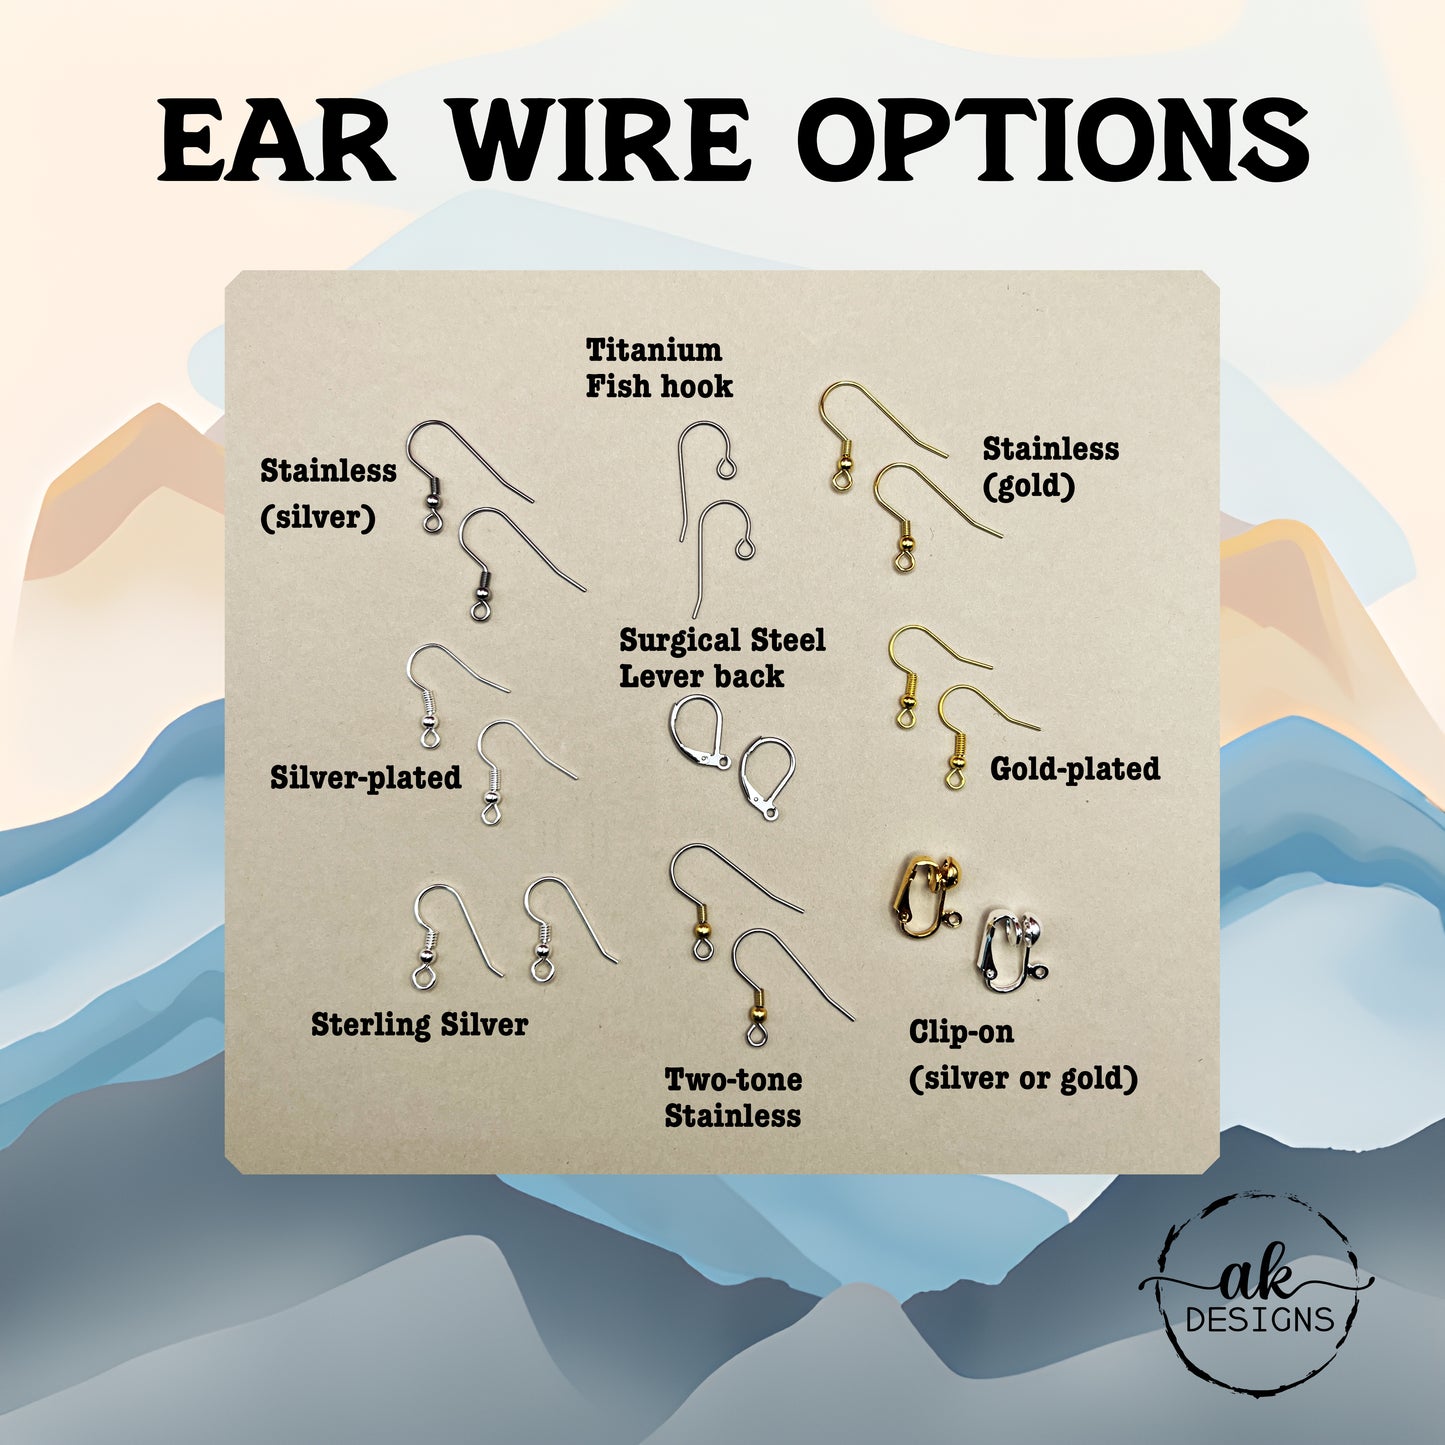 the ear wire options are available for all types of earrings